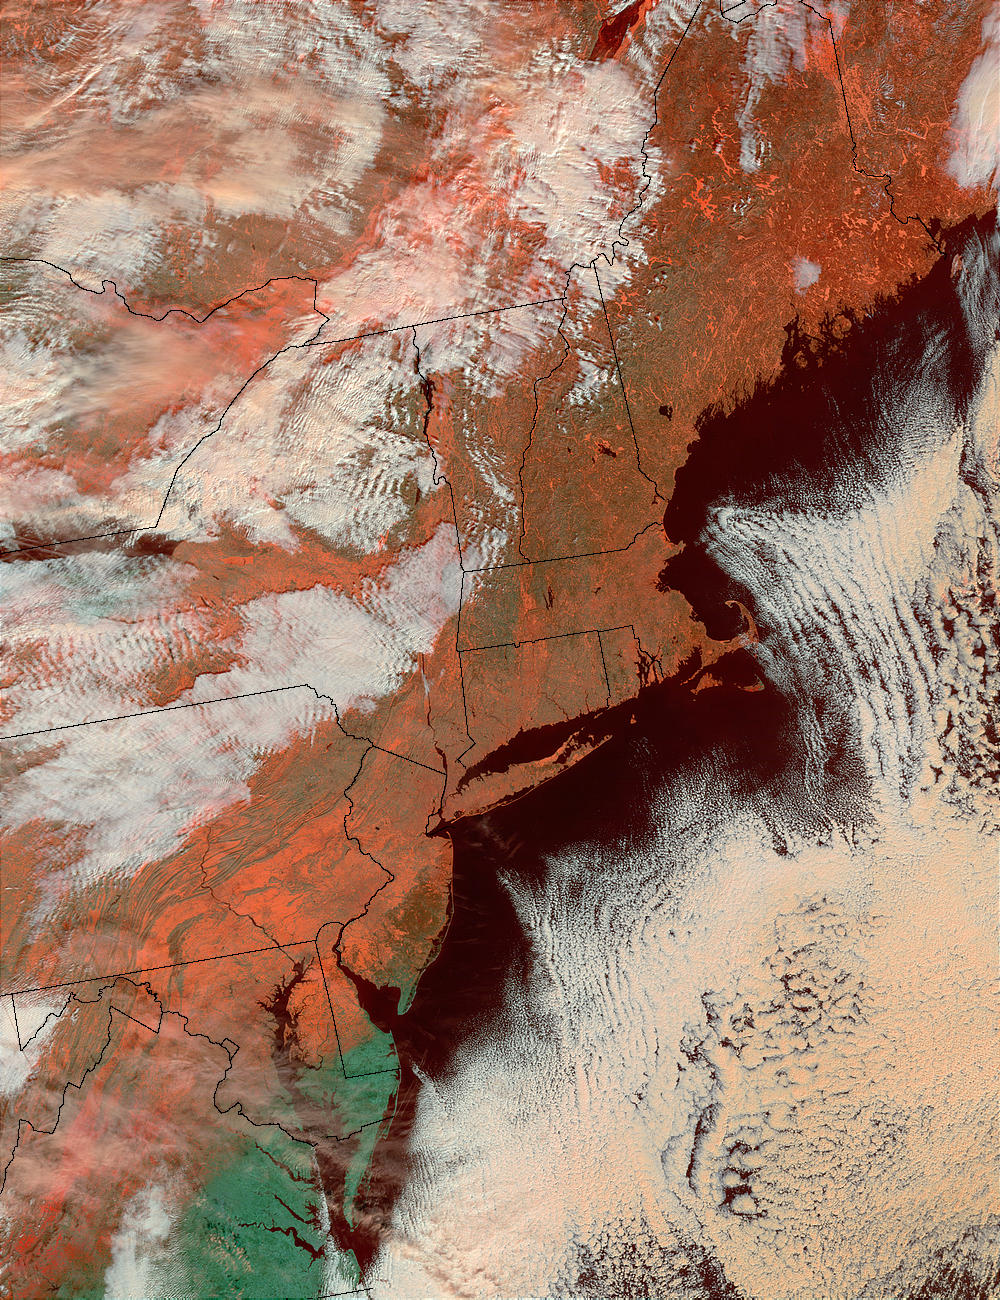 Snow in Northeast United States - related image preview